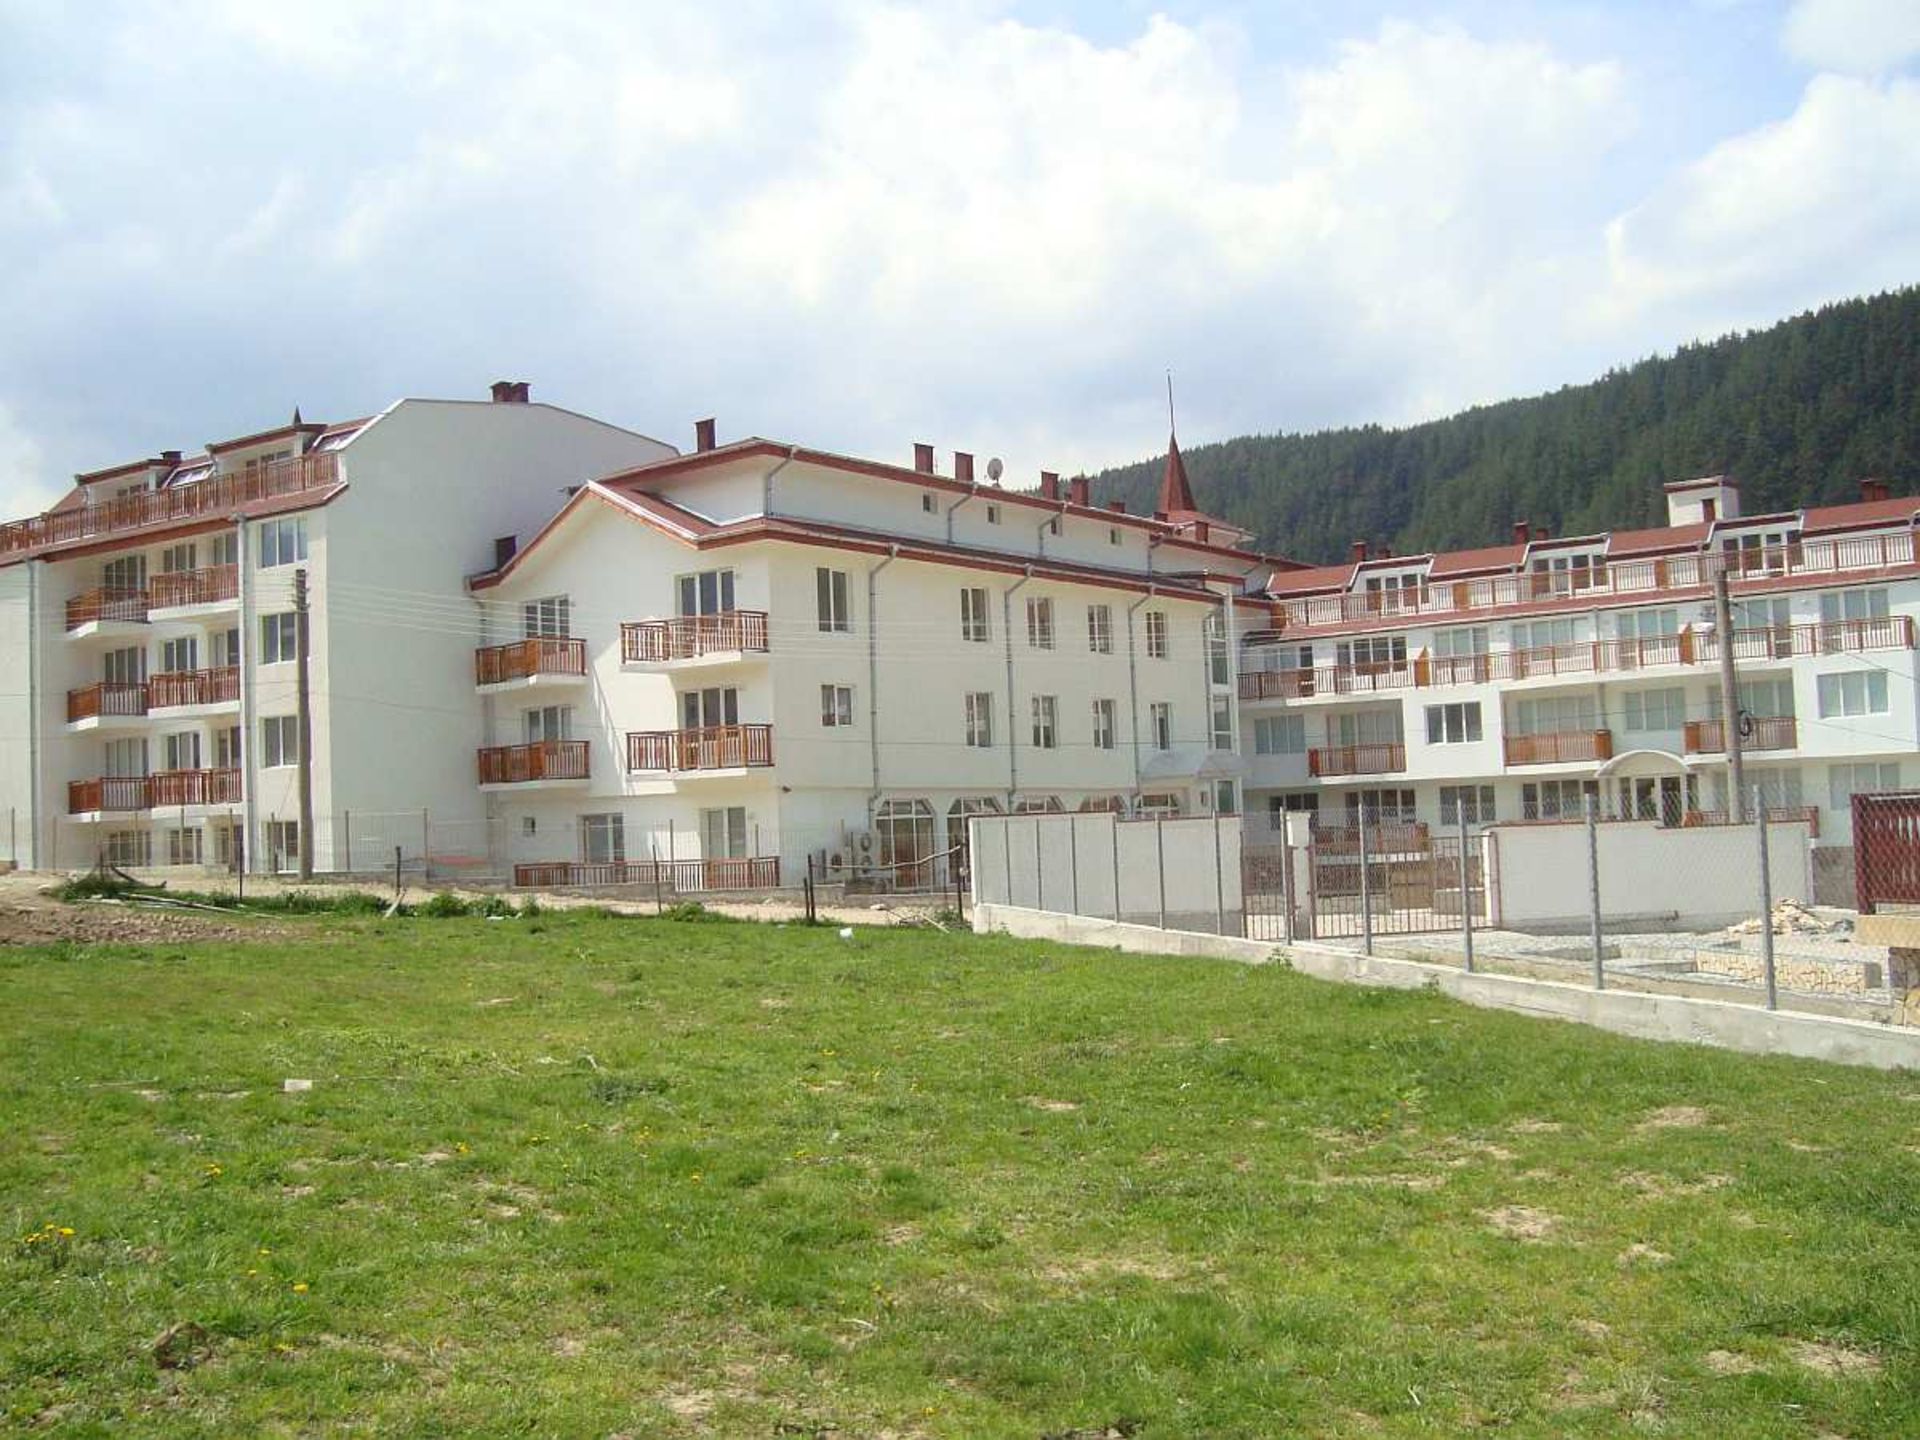 Large leisure centre/SPA (OR BIGGEST APARTMENT IN BULGARIA new mountain apartment complex Borovets - Image 36 of 38